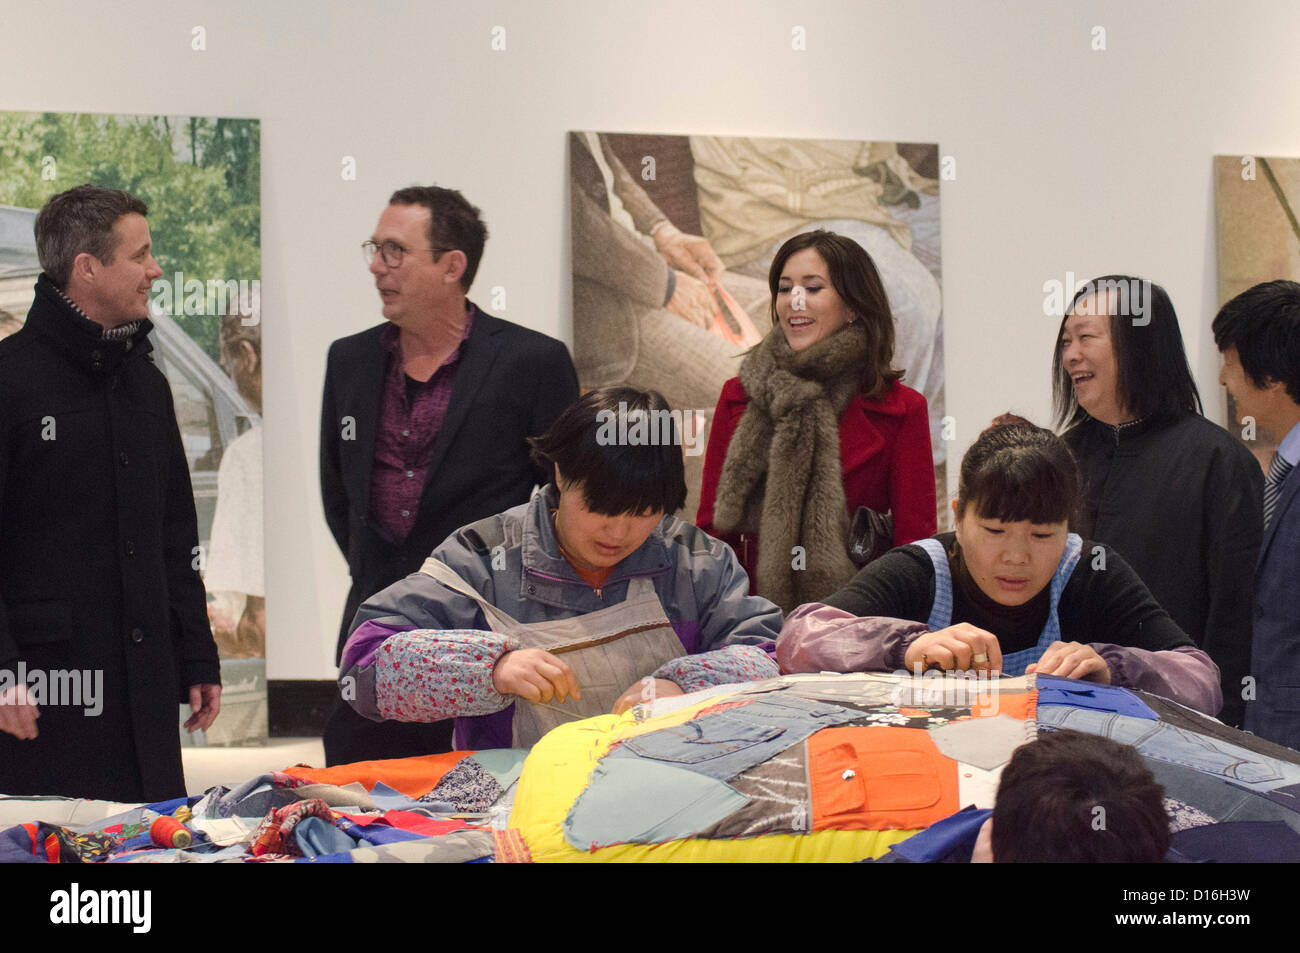 Crown Prince Frederik and Crown Princess Mary of Denmark visit Red Brick Art Gallery in the 798 Art District of Beijing, China as part of an Asia tour including Hong Kong and Beijing. © Time-Snaps Stock Photo